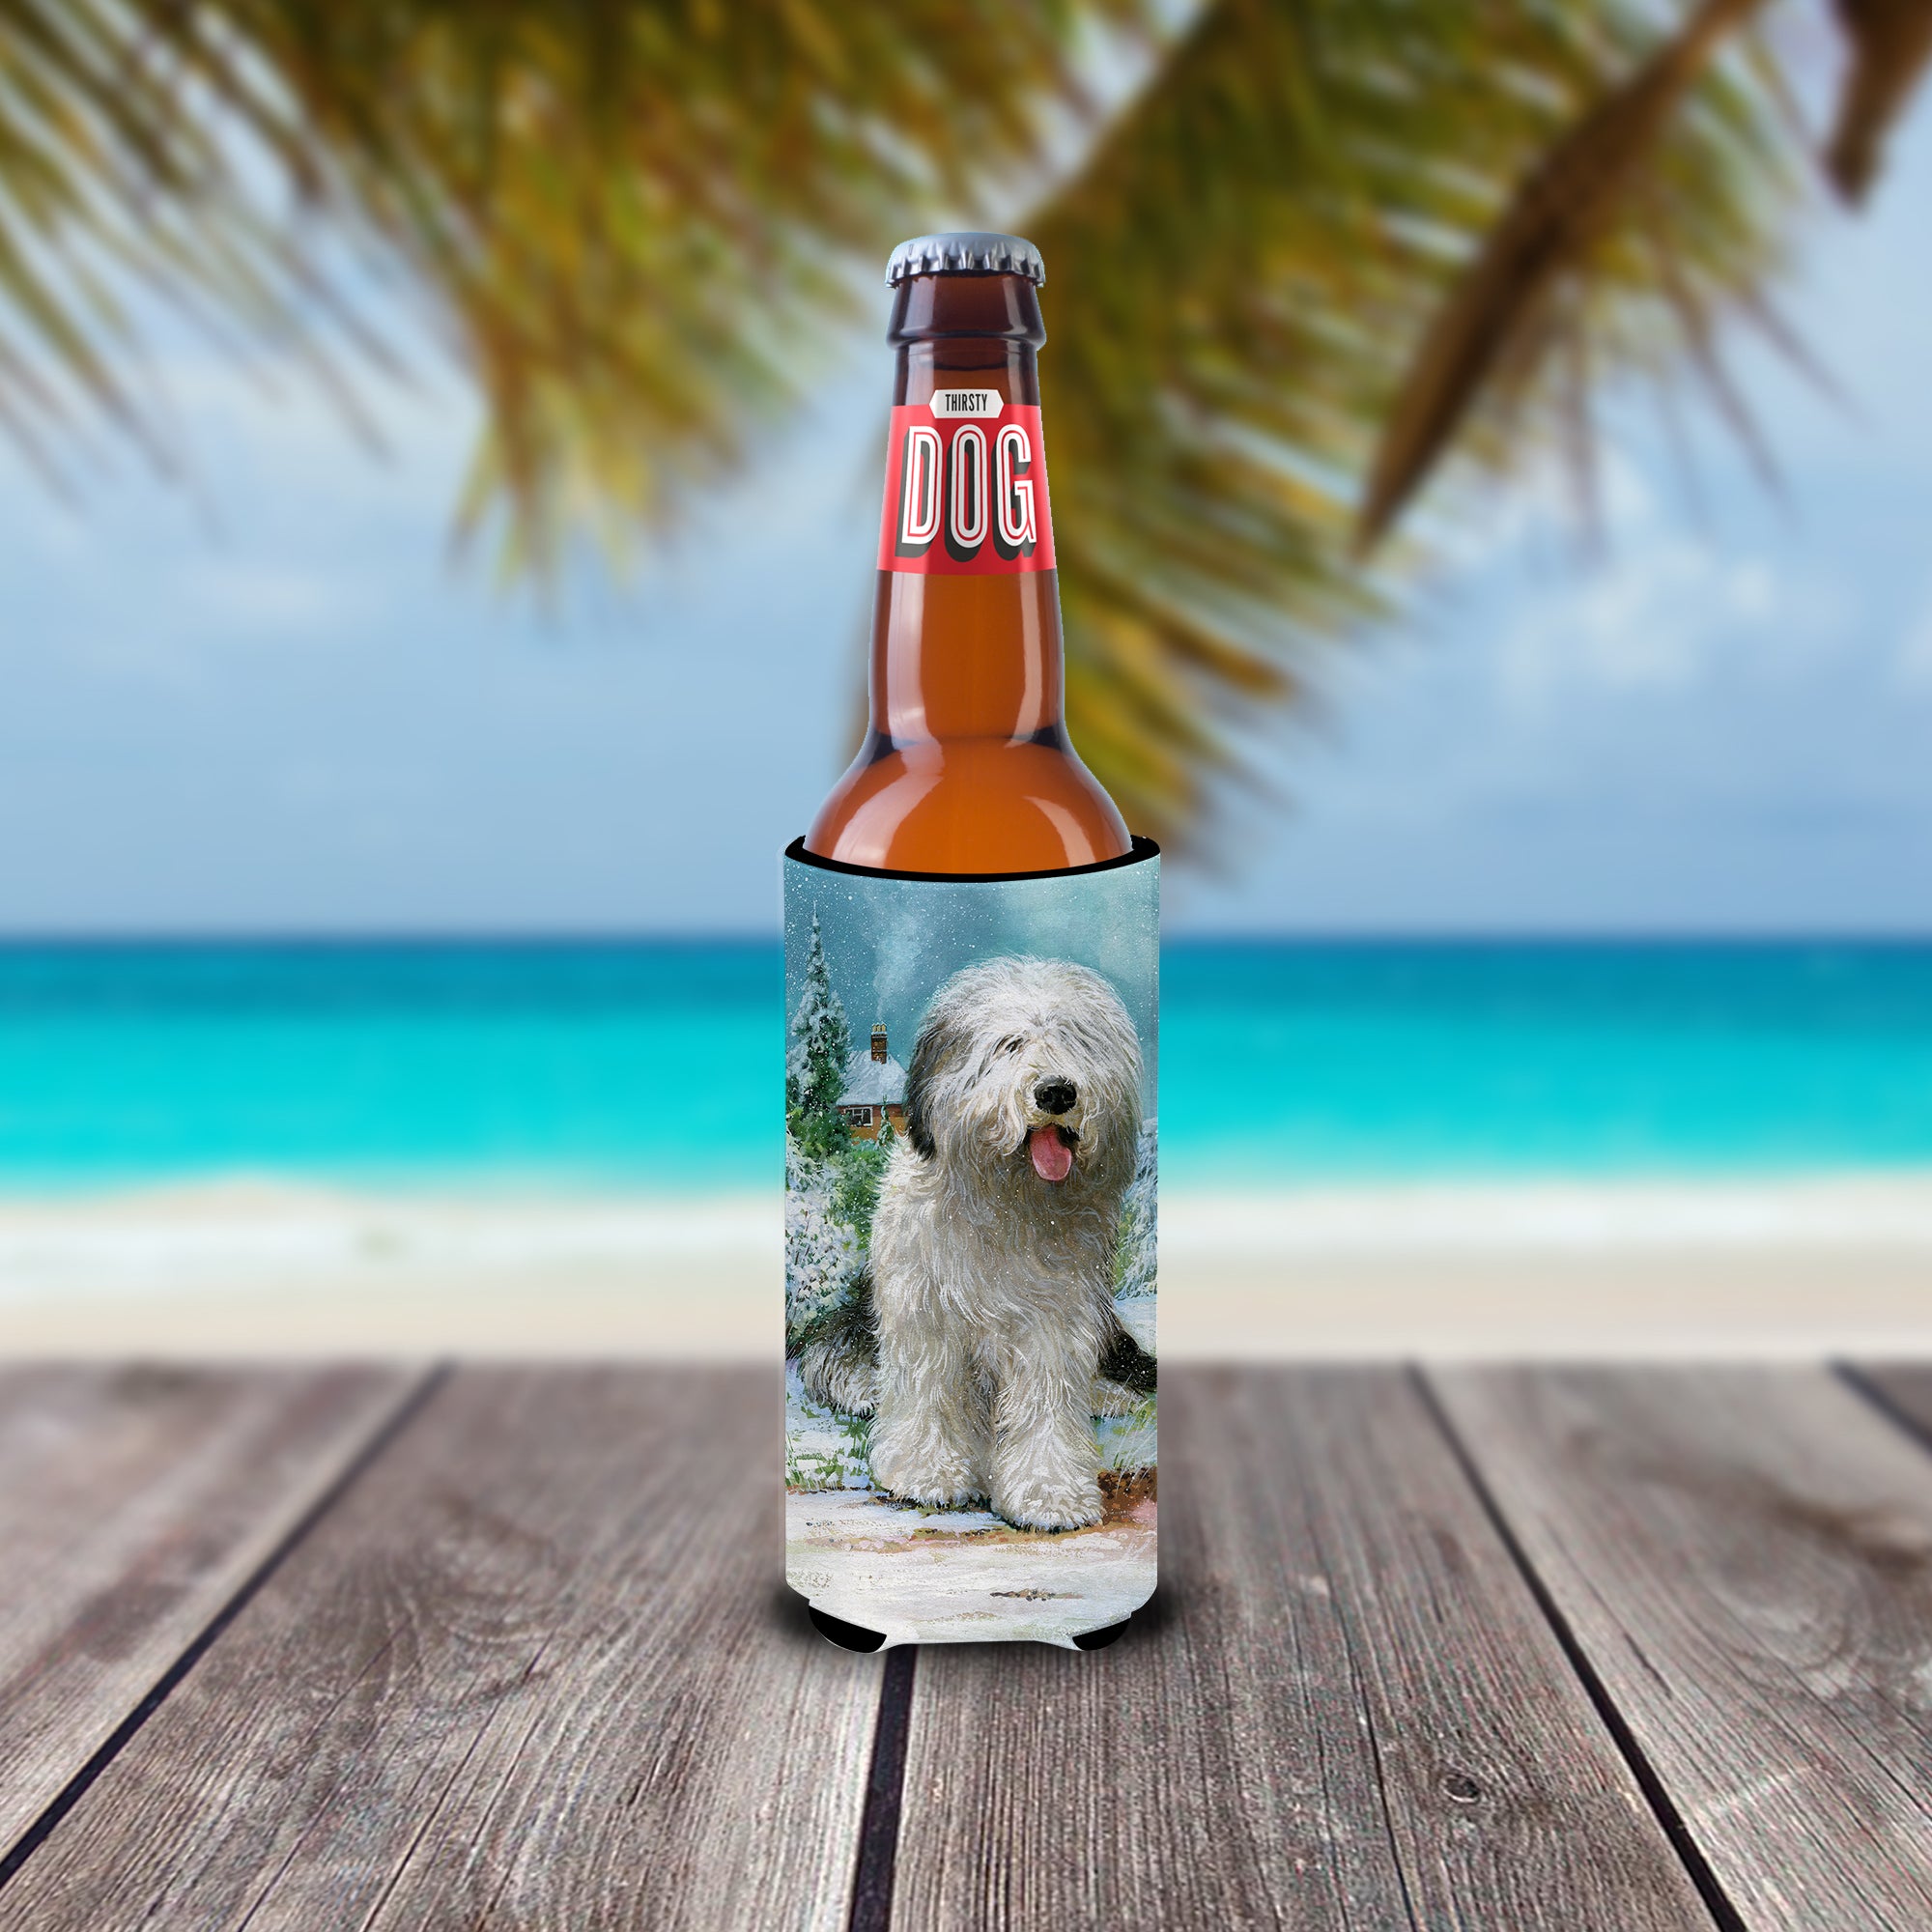 Old English Sheepdog by Don Squires Ultra Beverage Insulators for slim cans SDSQ0304MUK  the-store.com.